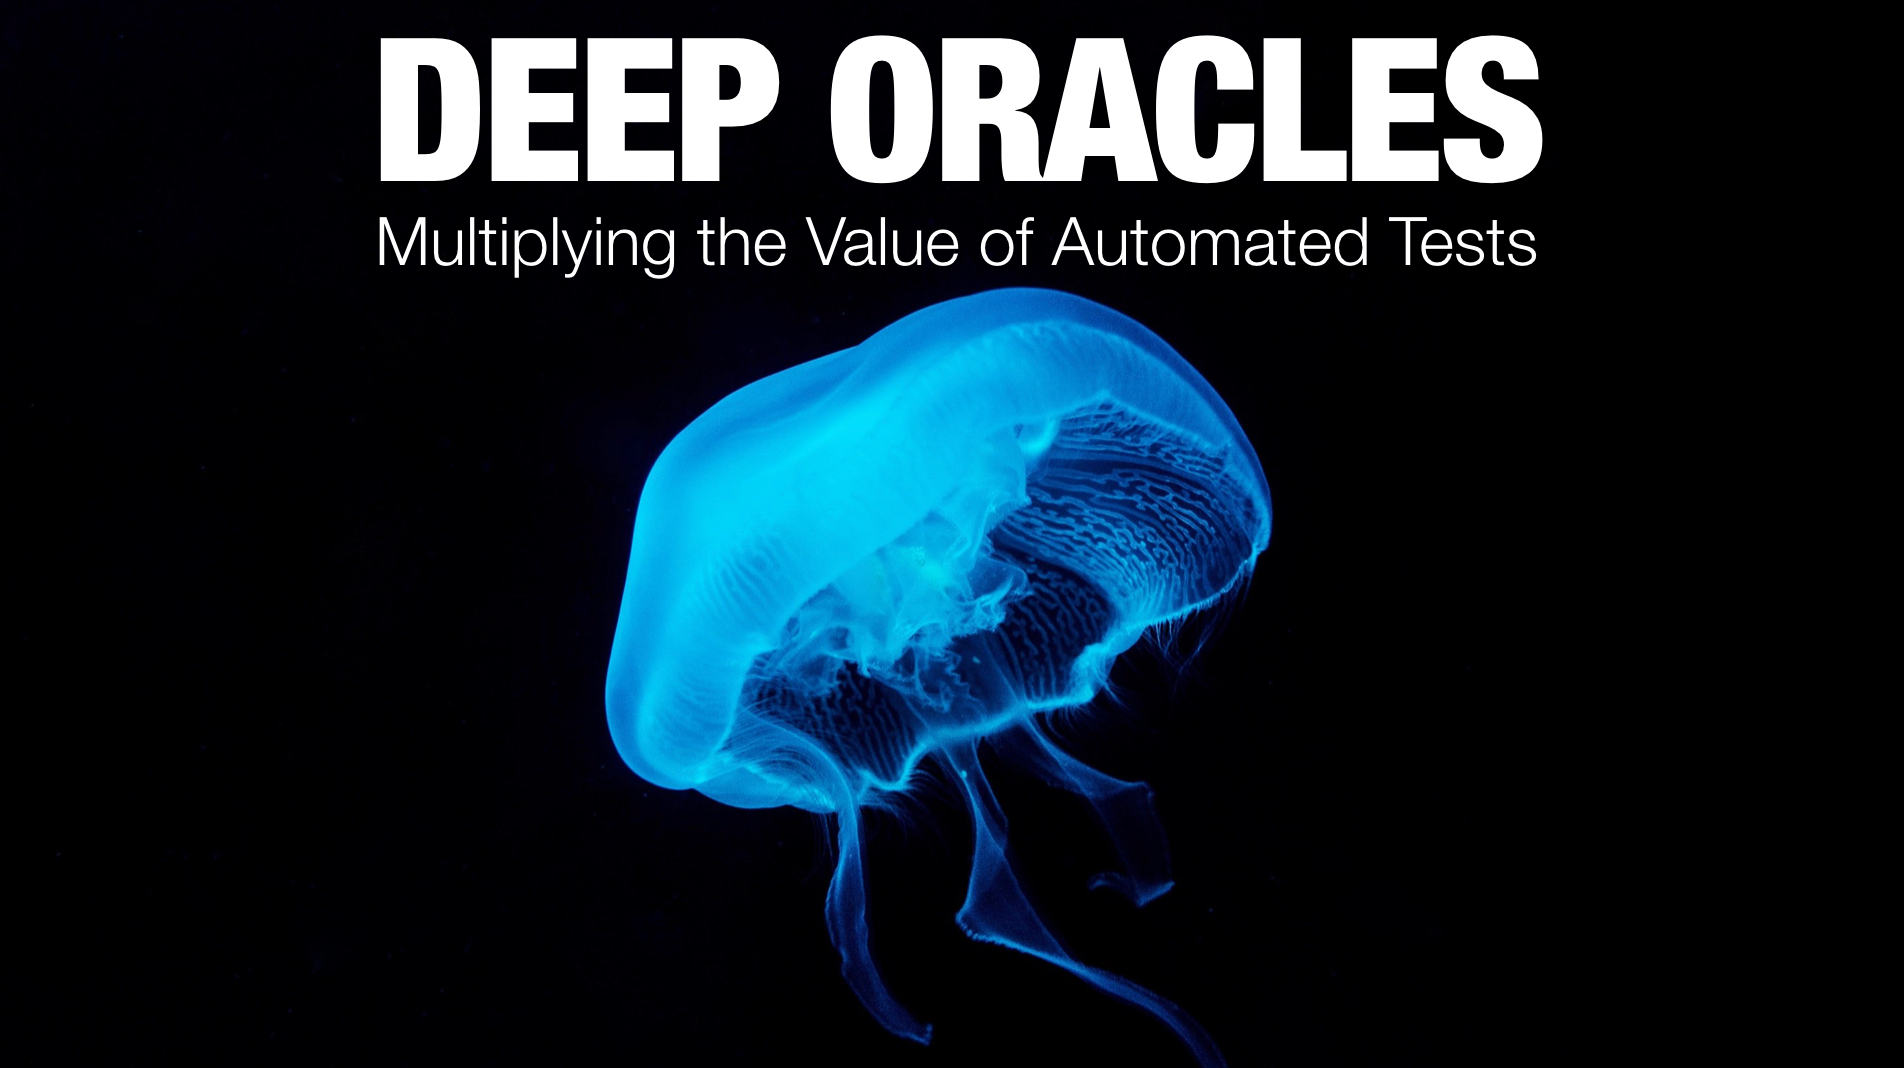 Deep Oracles: Multiplying the Value of Automated Tests